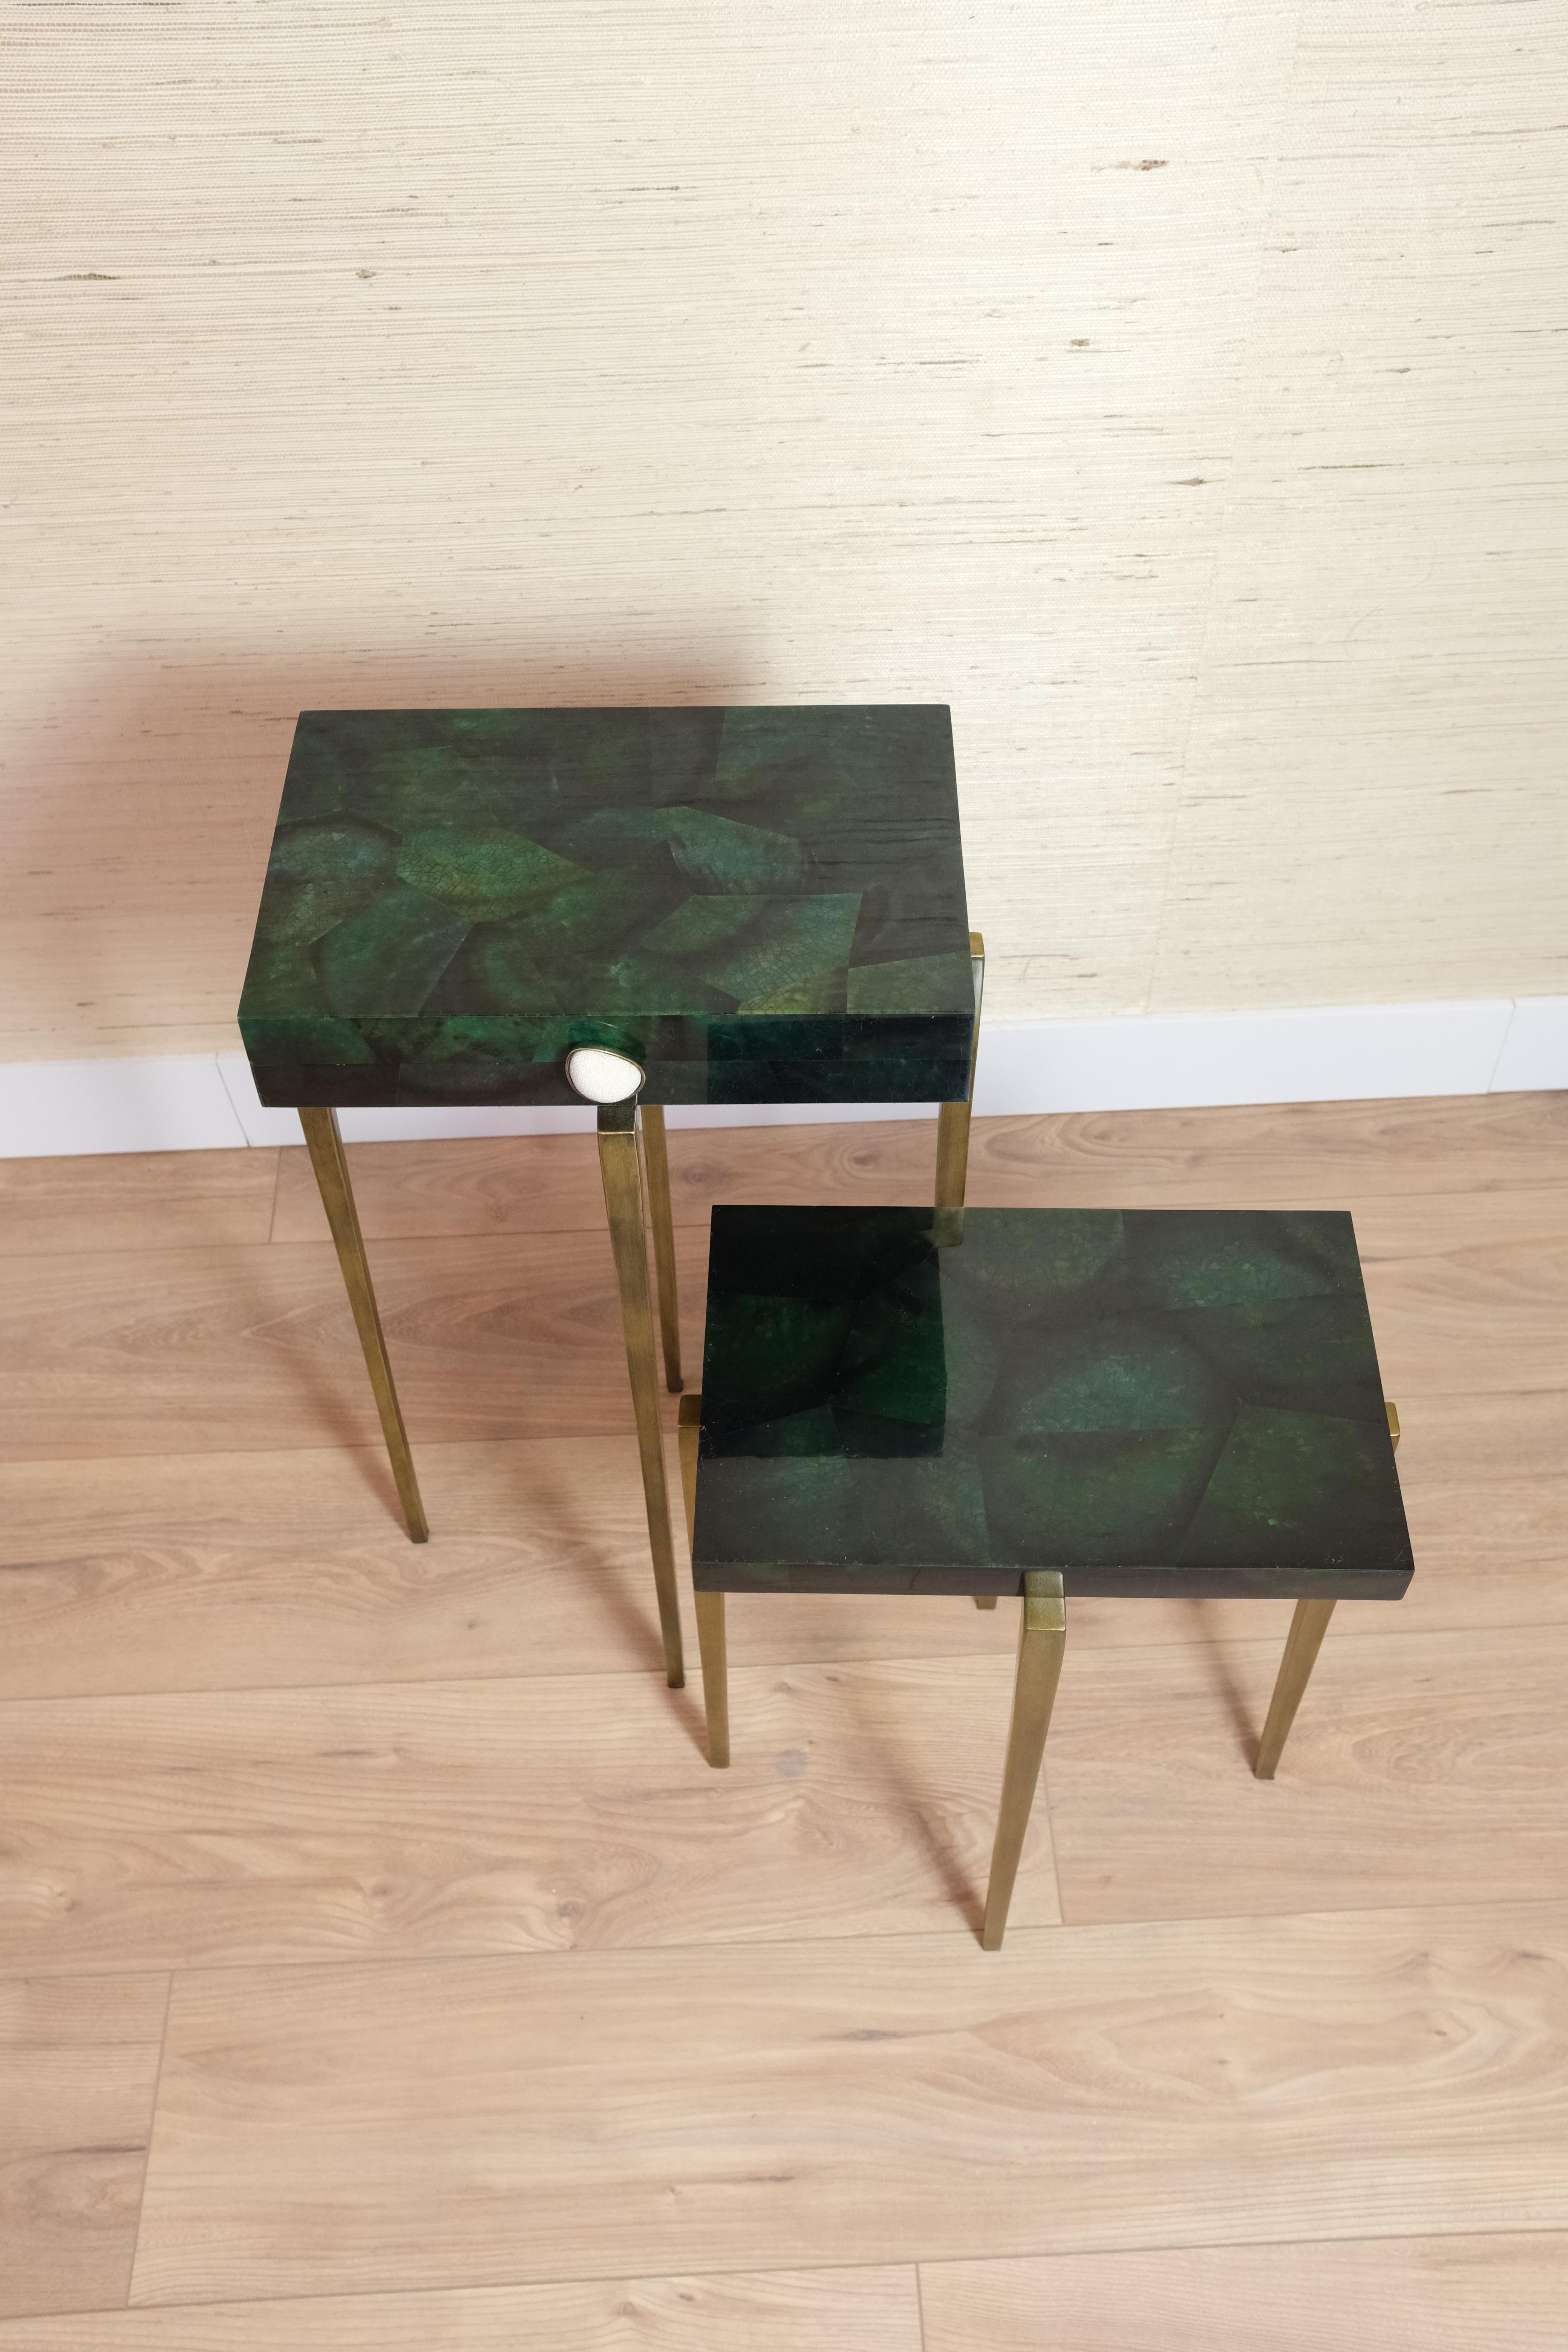 This set of tables is made of polished green shell marquetry.

One of the tables is a box with an hinged lid. It has a brass and shagreen handle. 
The interior is made of black suede.

The metal feet have an antique brass patina.

The tables are